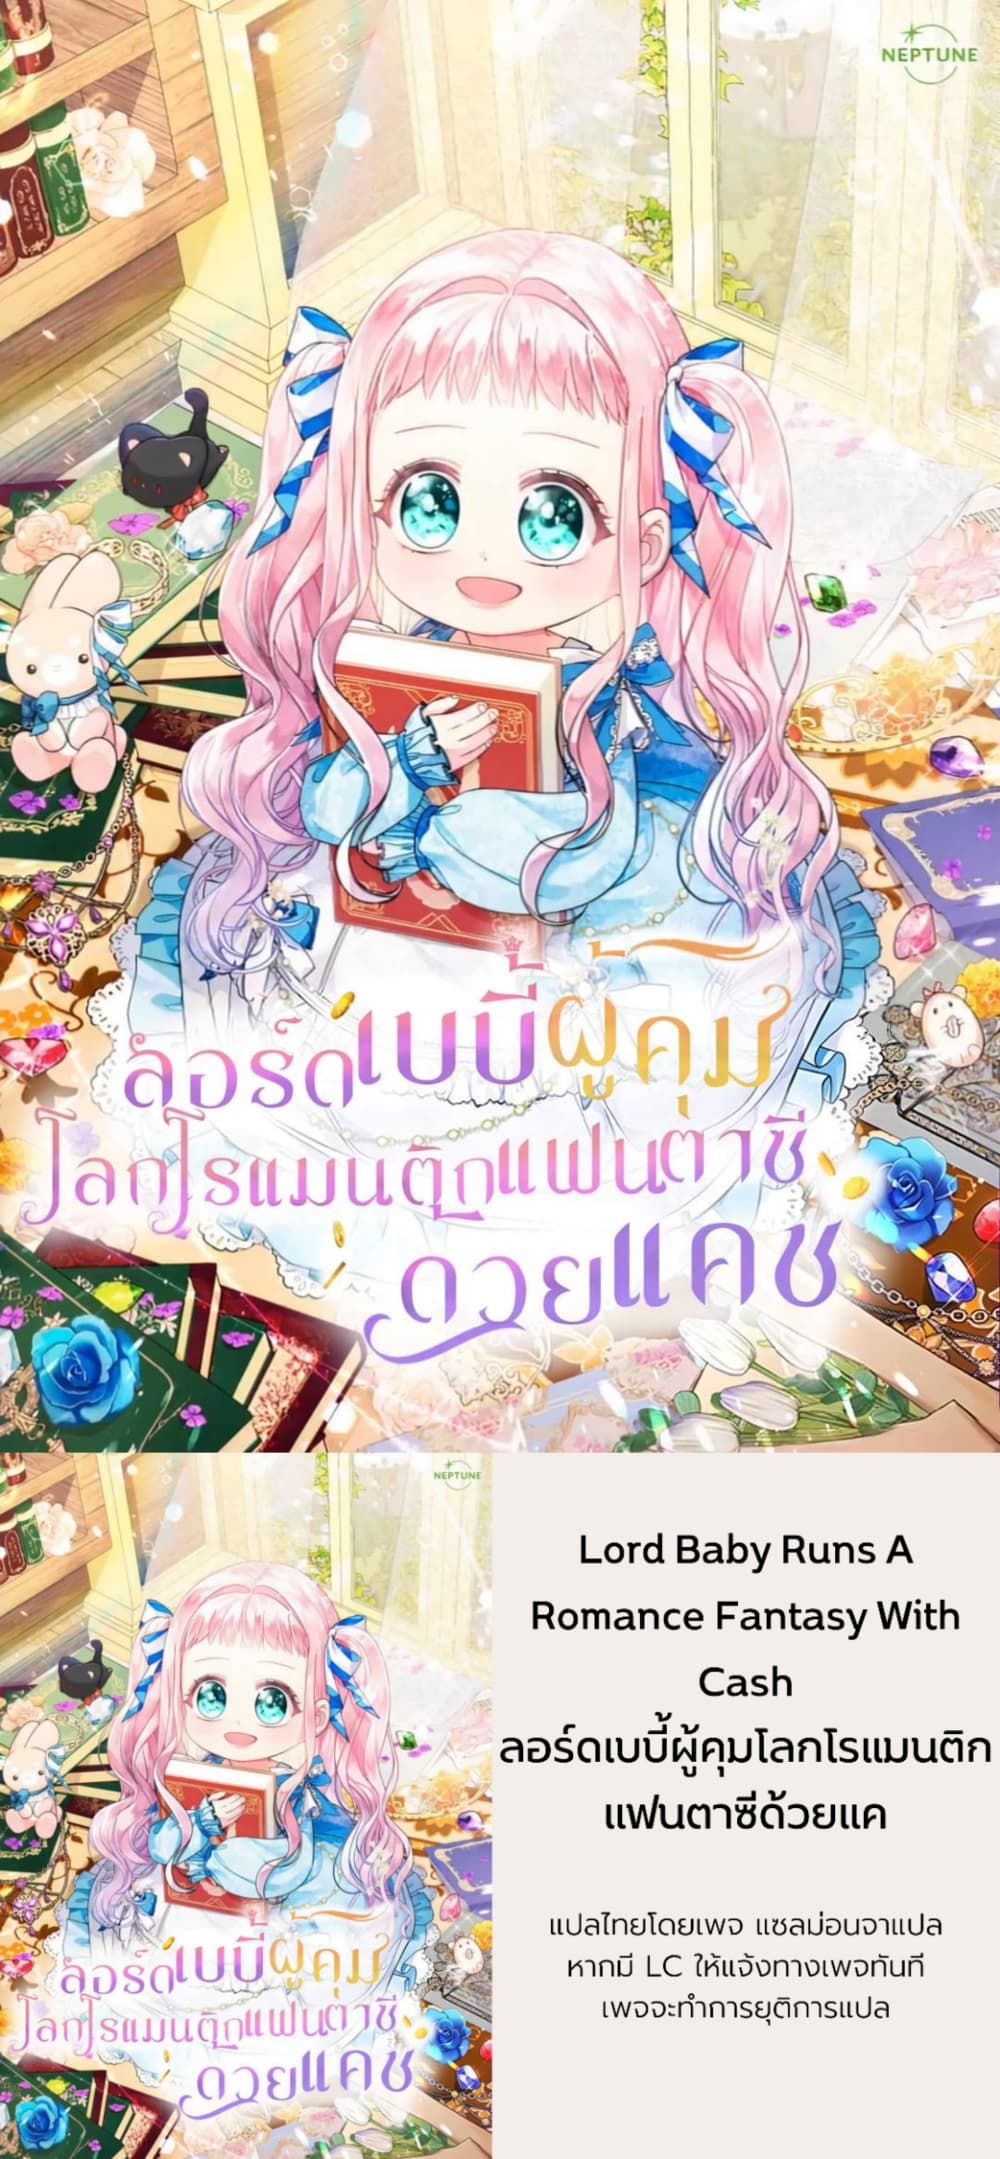 Lord Baby Runs a Romance Fantasy With Cash 13-13